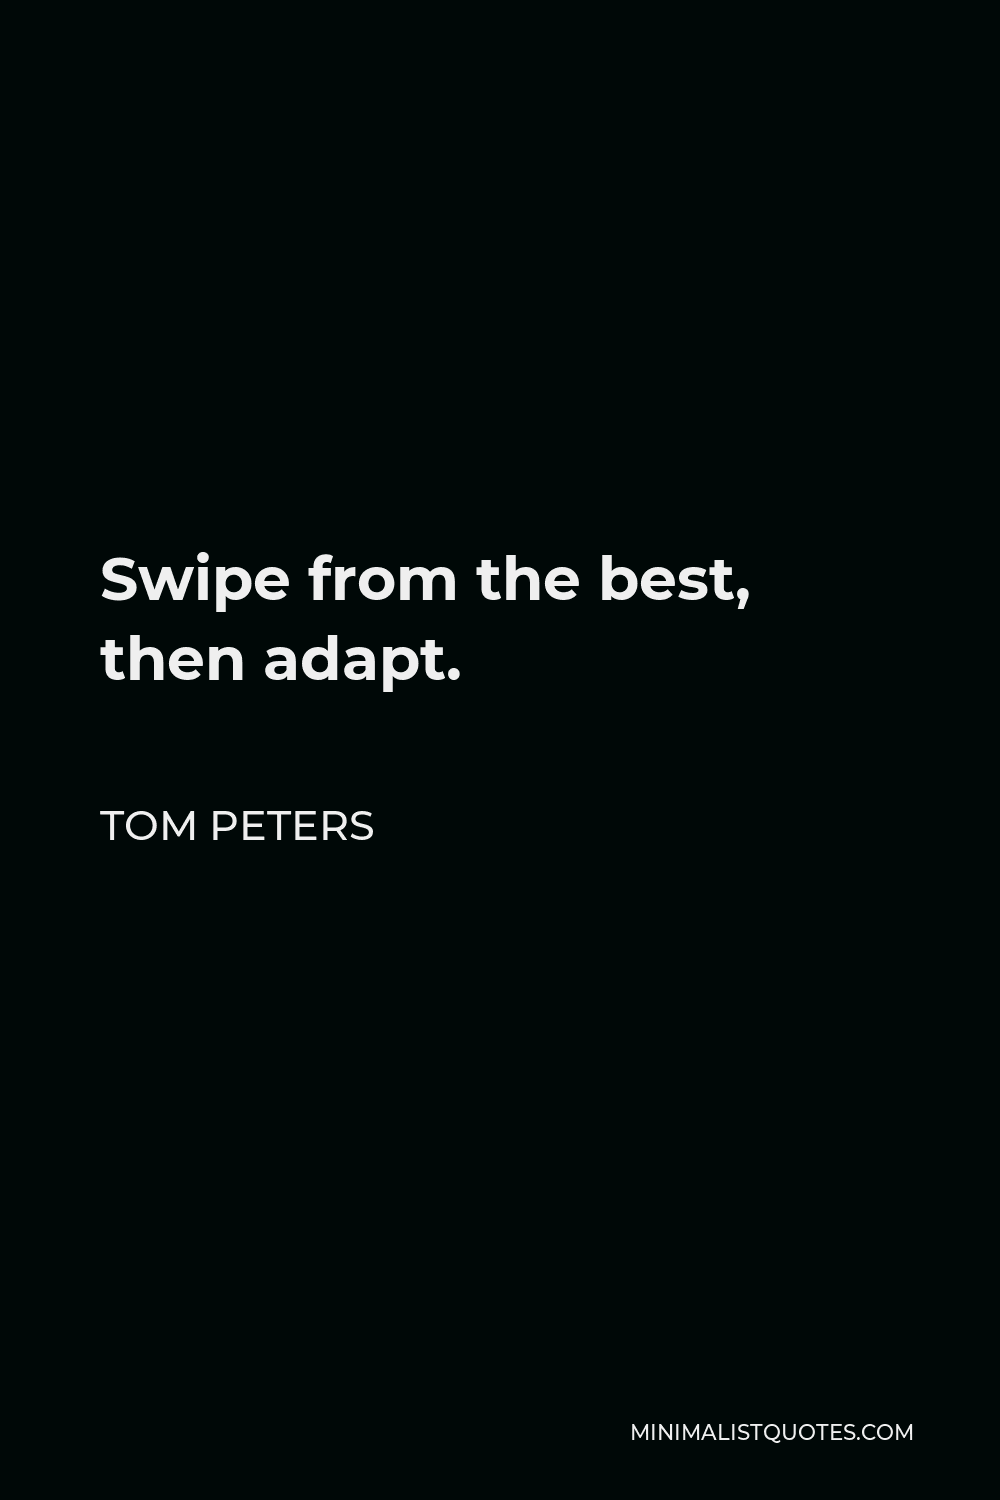 Tom Peters Quote - Swipe from the best, then adapt.